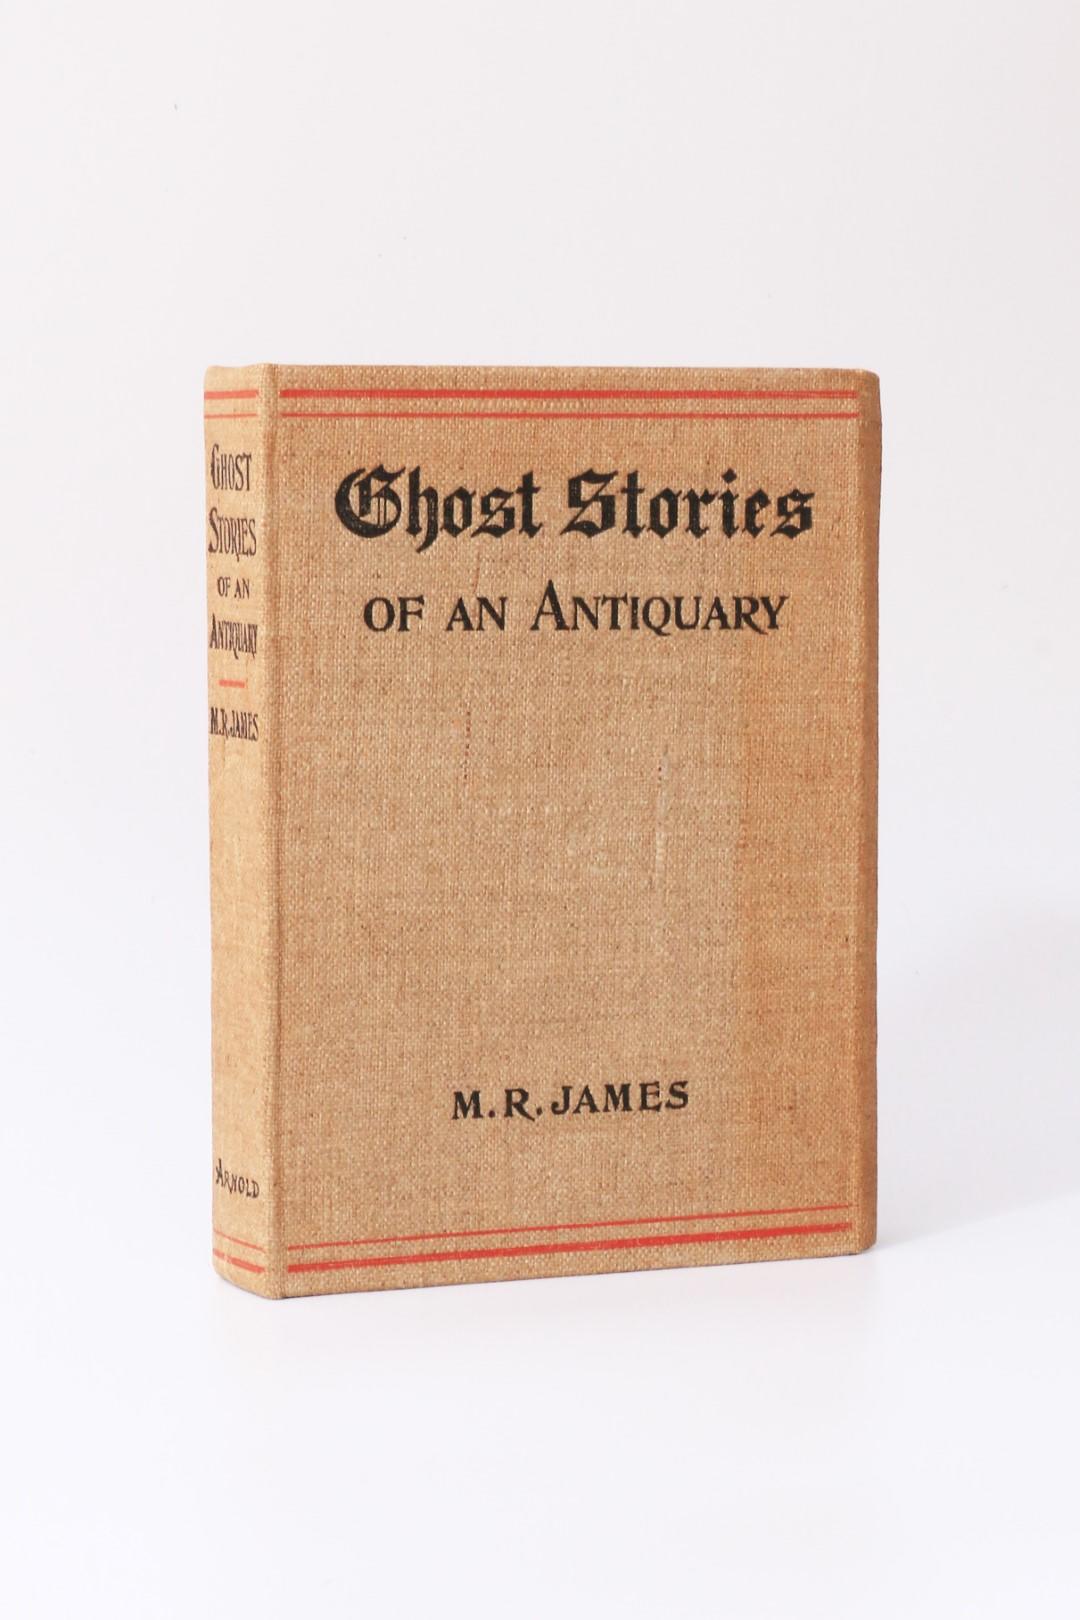 M.R. James - Ghost Stories of an Antiquary - Edward Arnold, 1904, First Edition.